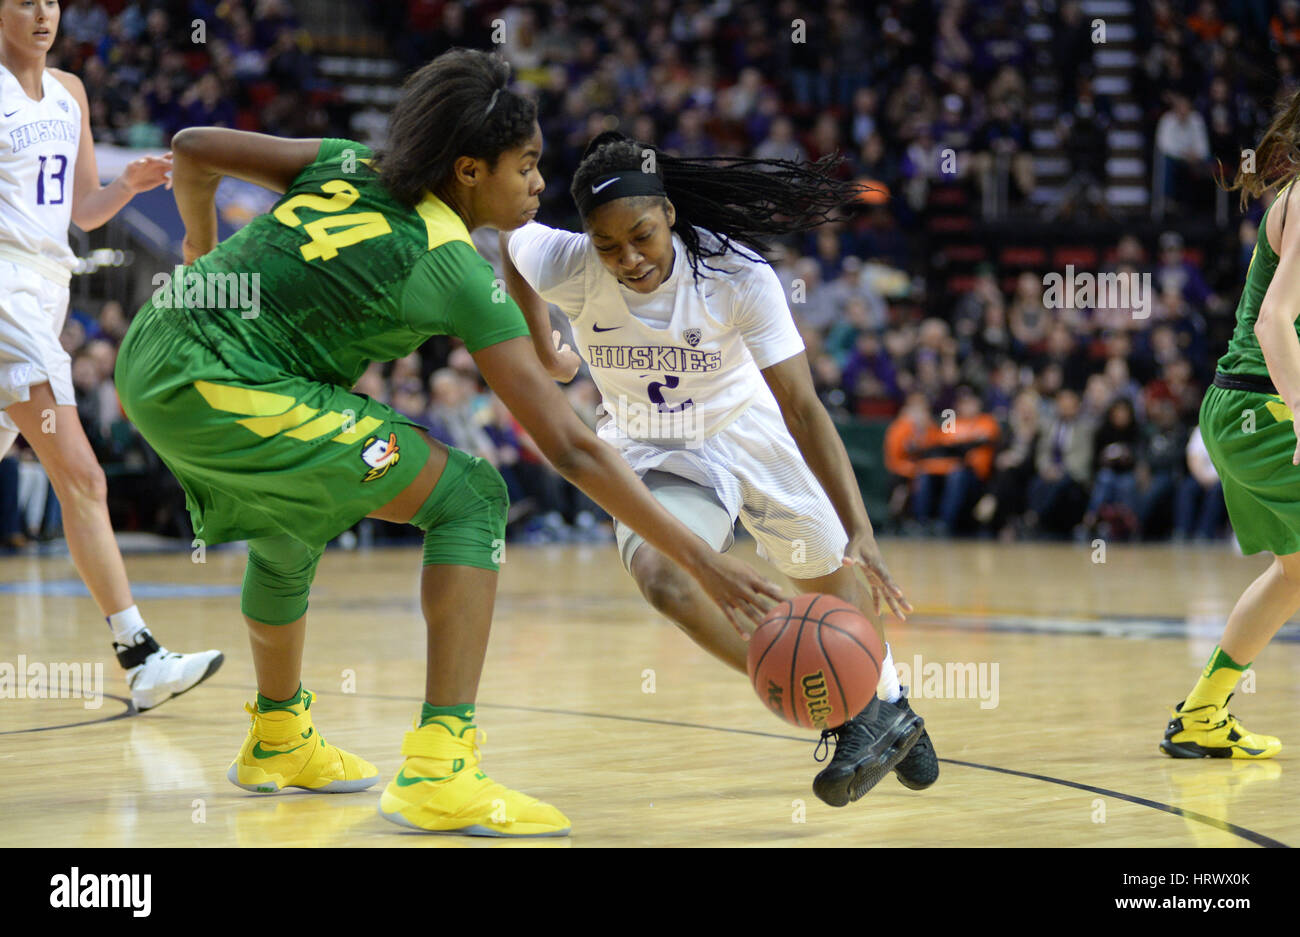 March 3, 2017: UW point guard Aarion McDonald (2) drives to the hoop against Oregon's Ruthy Hebard (24) during a PAC12 women's tournament game between the Washington Huskies and the Oregon Ducks. The game was played at Key Arena in Seattle, WA. Jeff Halstead / CSM Stock Photo